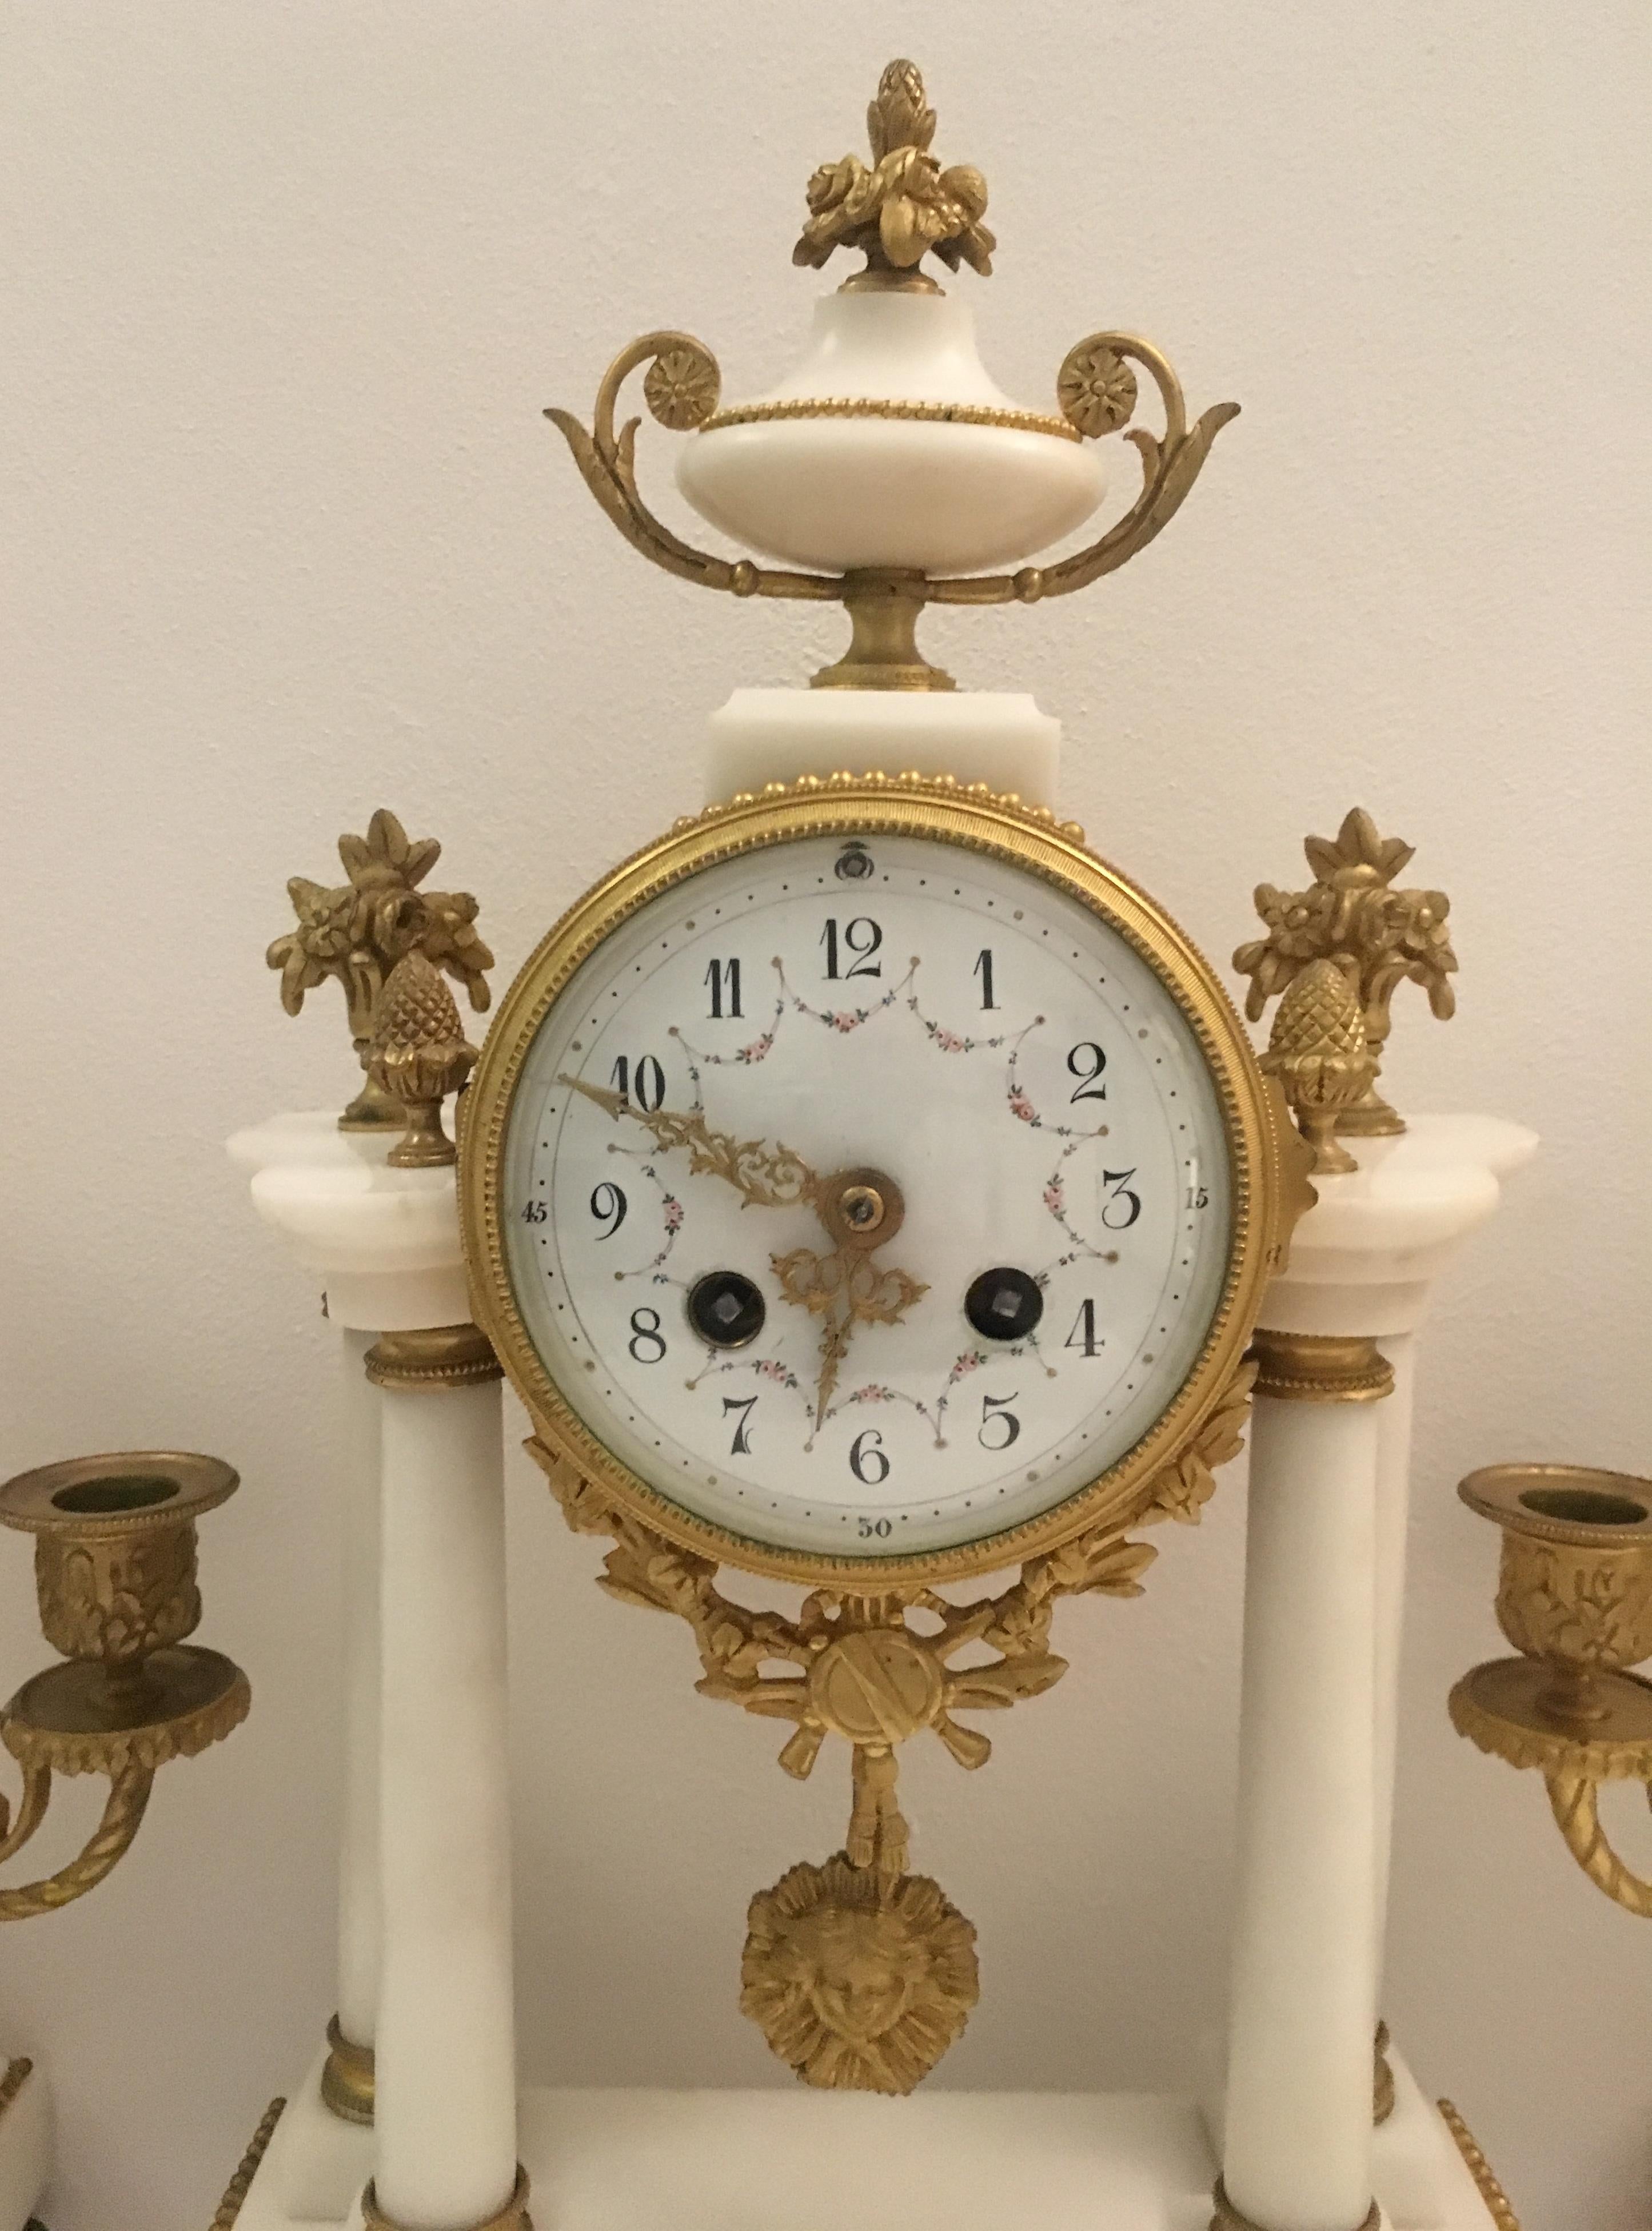 A beautiful 19th Century French Louis XVI Ormolu and White Carrara Boudoir Clock with Pair of Candelabras. 

This antique French ormolu-mounted white marble boudoir clock, circa 1880. It's of elegant Louis XVI style, classical columns wrapped with